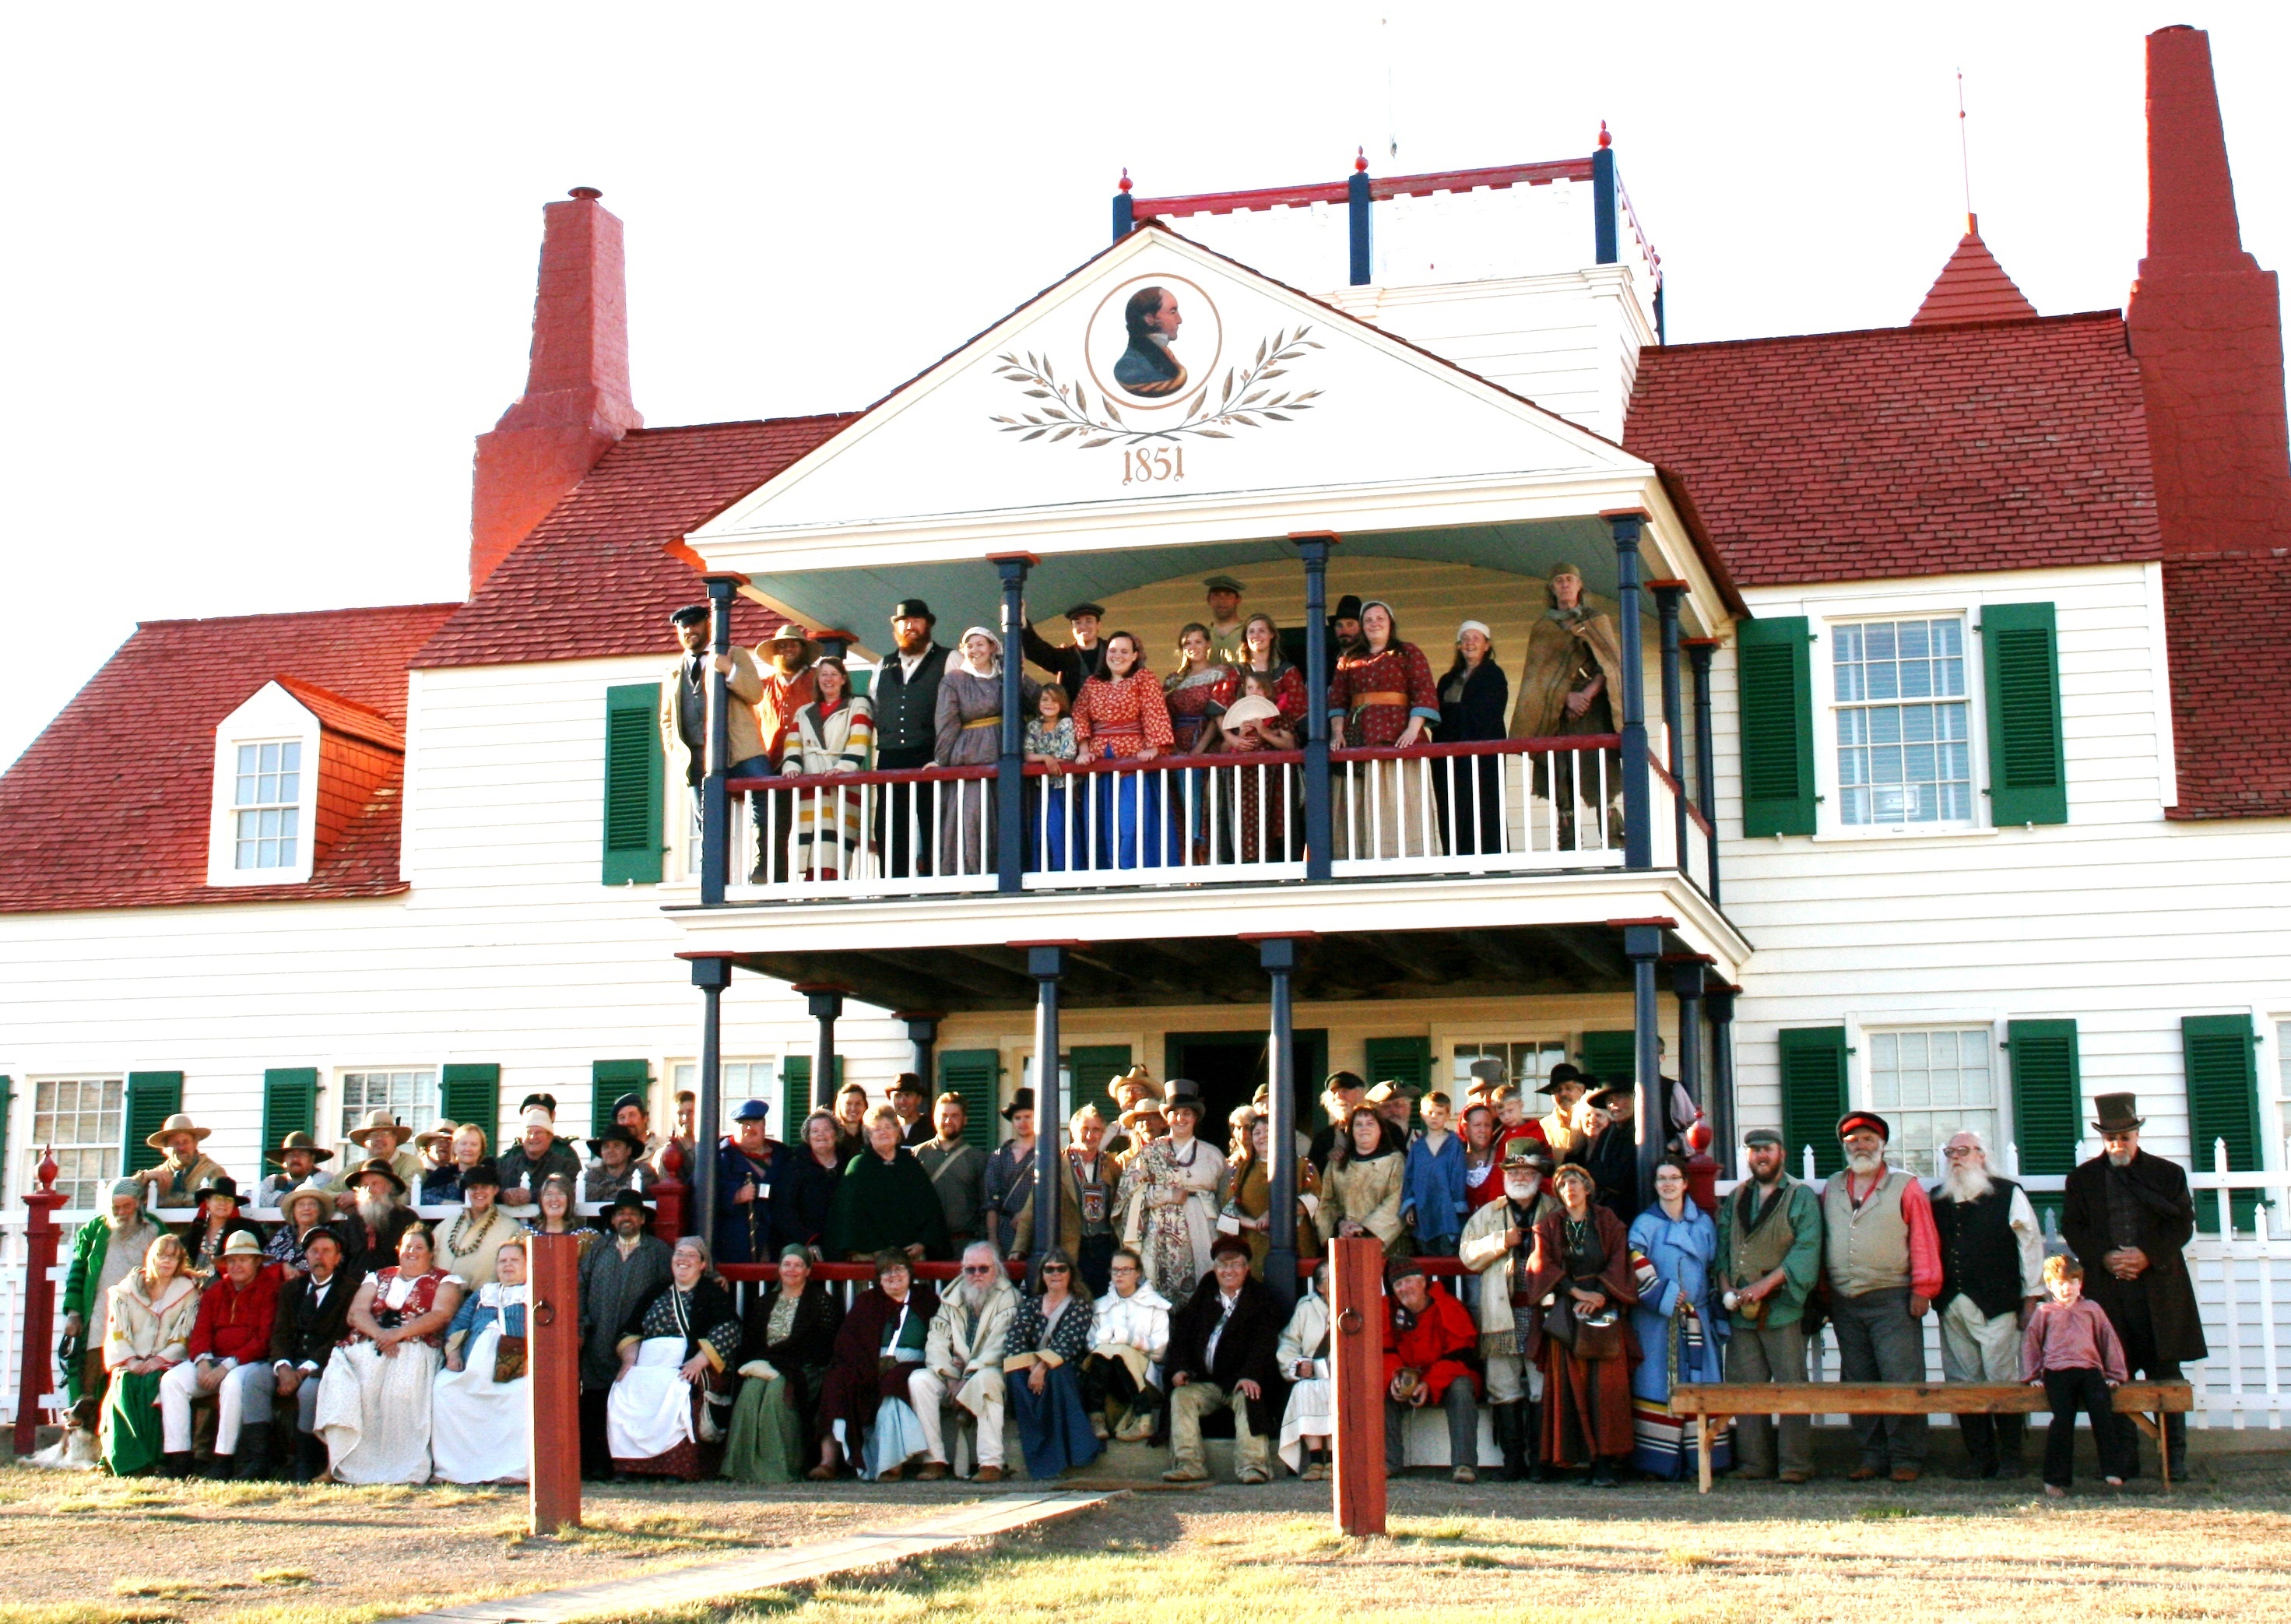 People in historic clothing pose in front of impressive home